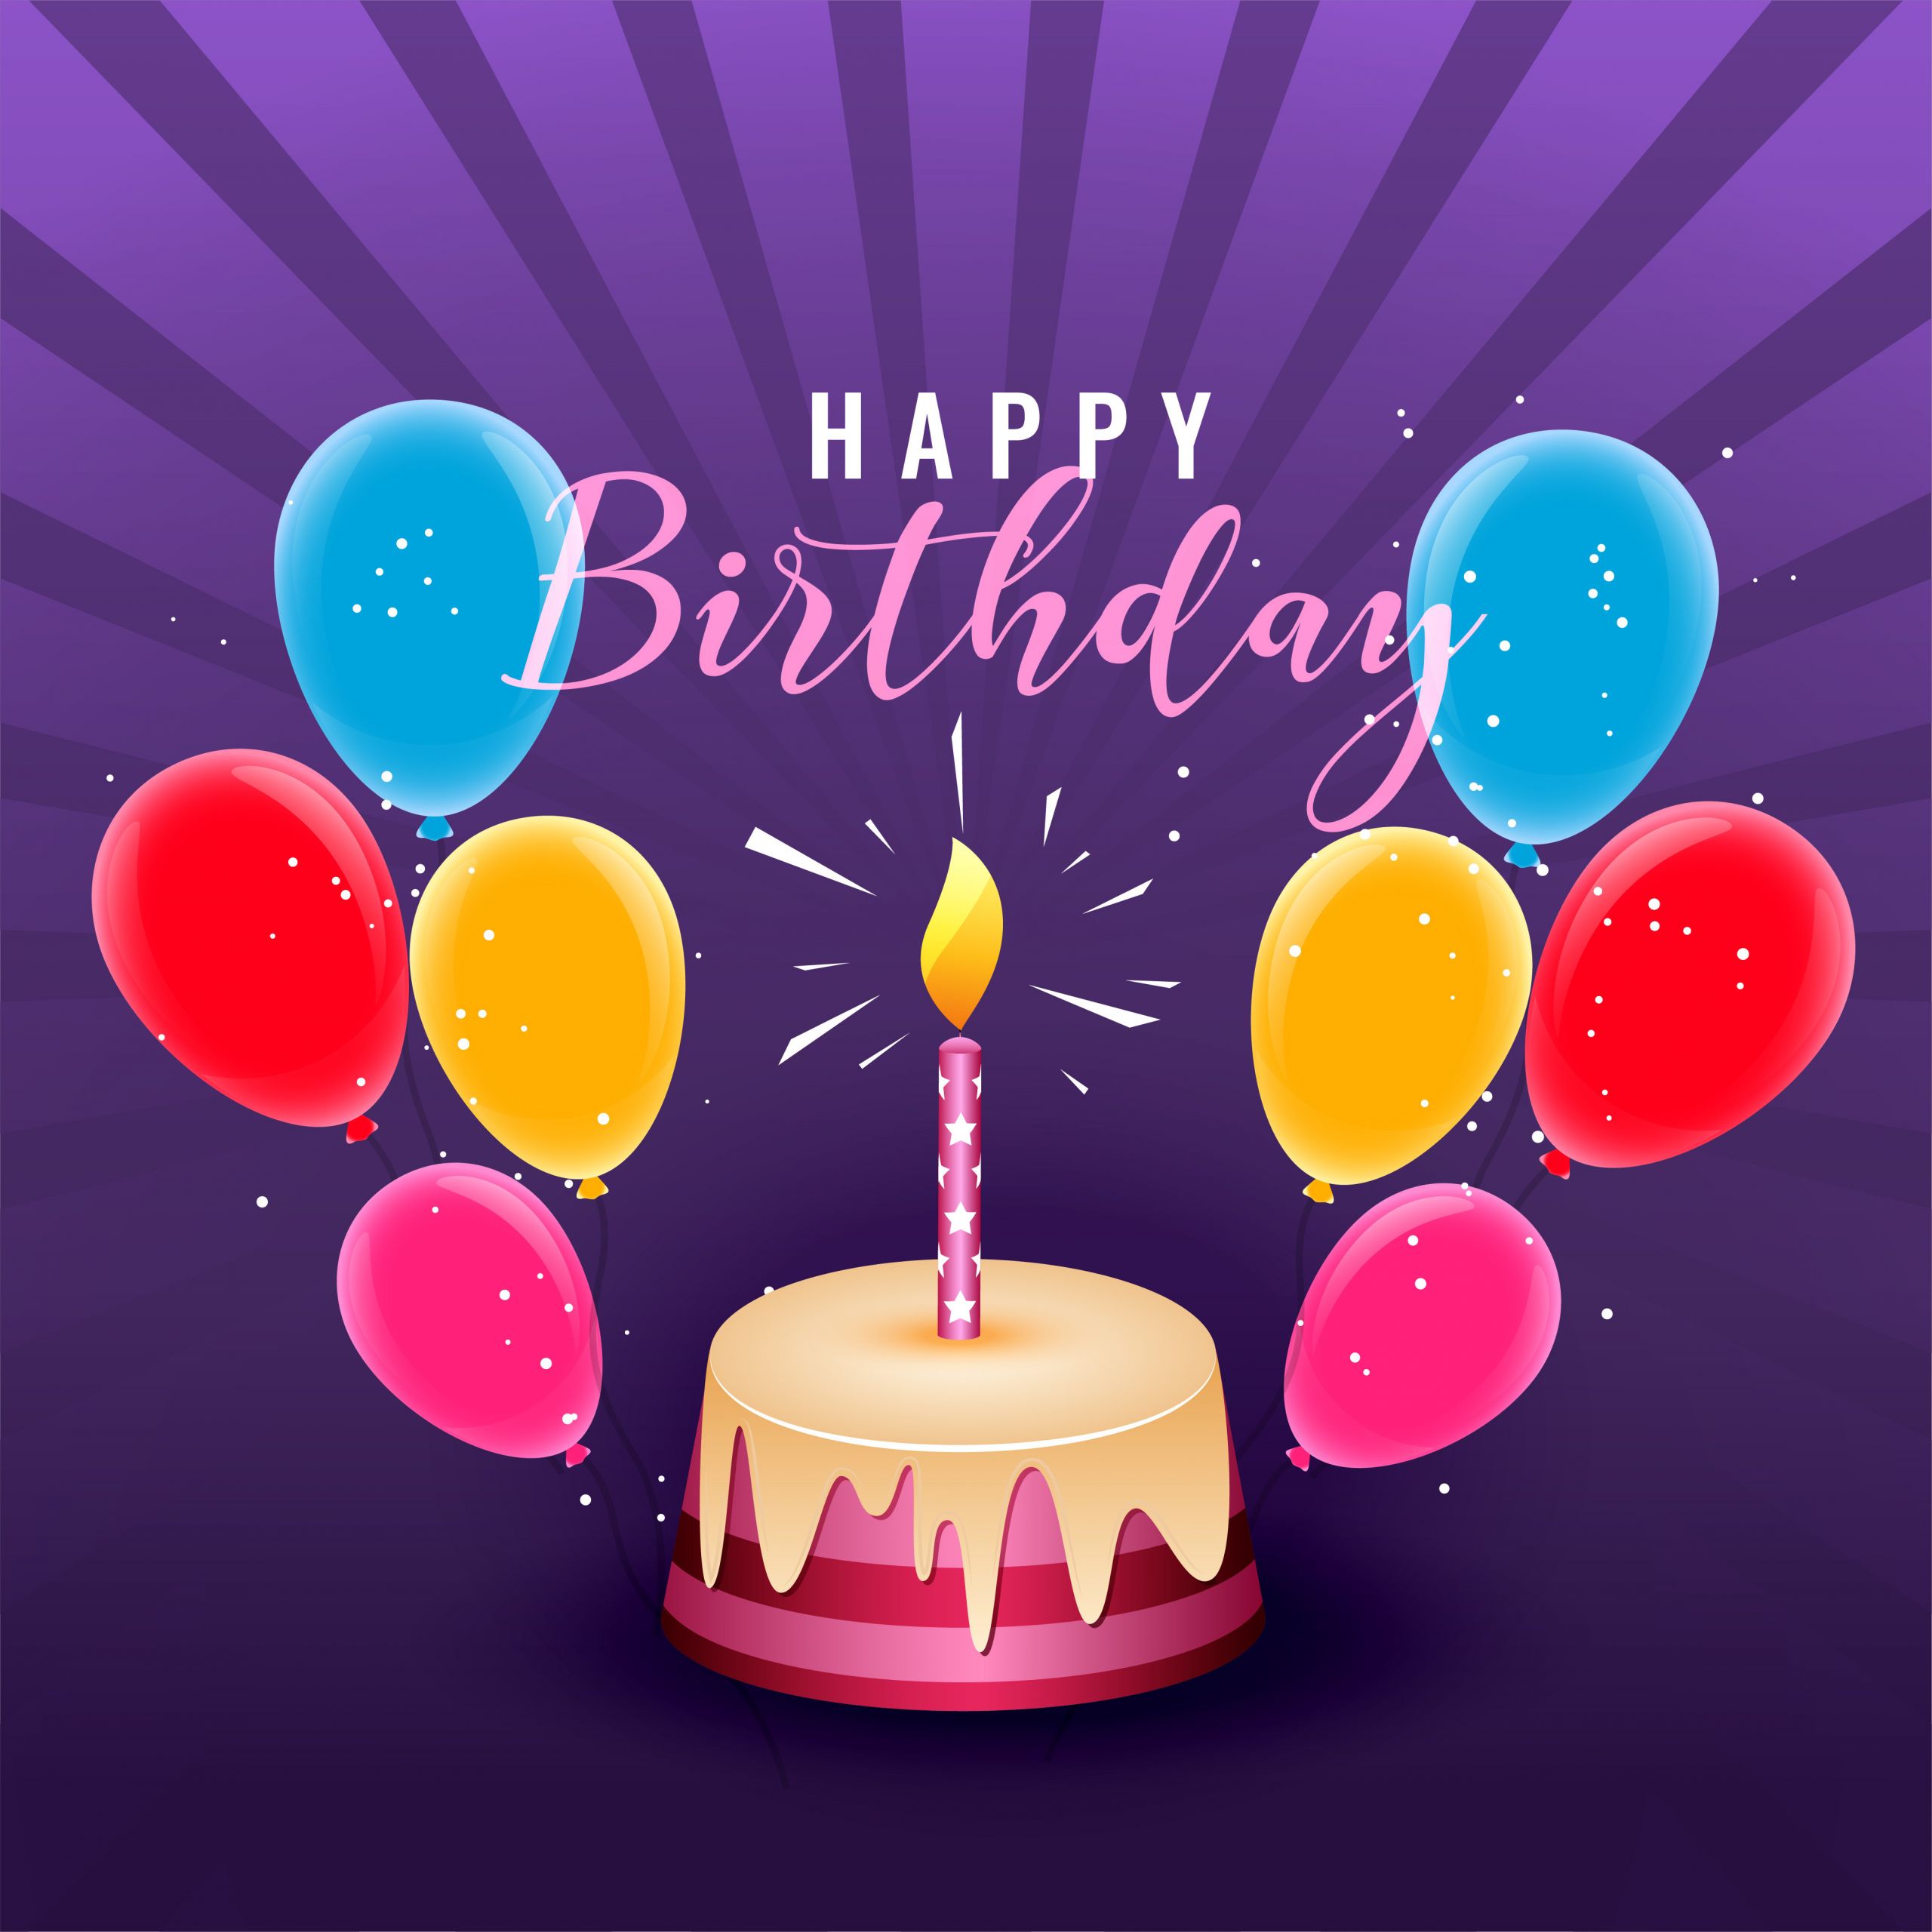 Happy Birthday Party
 happy birthday party celebration poster design with